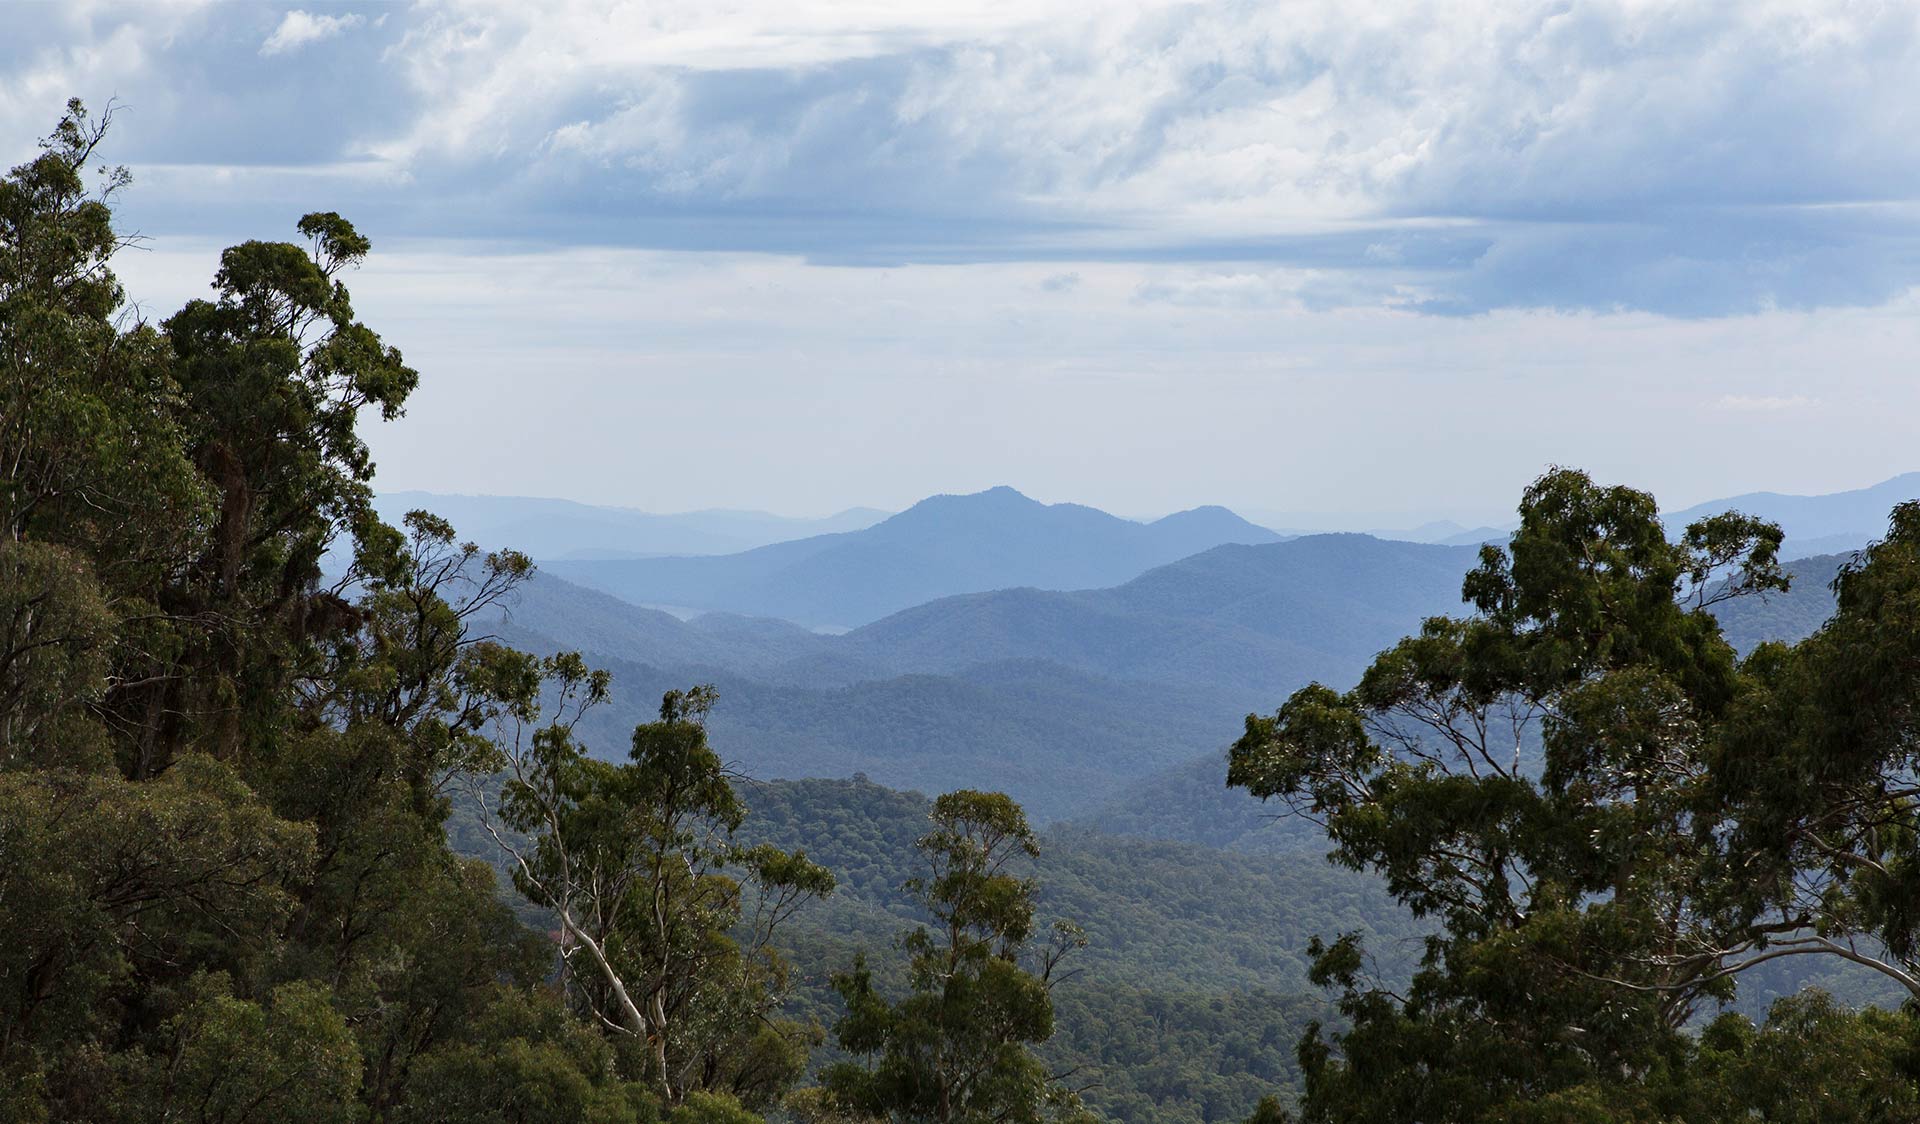 The view of Mt Buffalo from the summit of Mt Cobbler near the headwaters of the Dandongadale River.